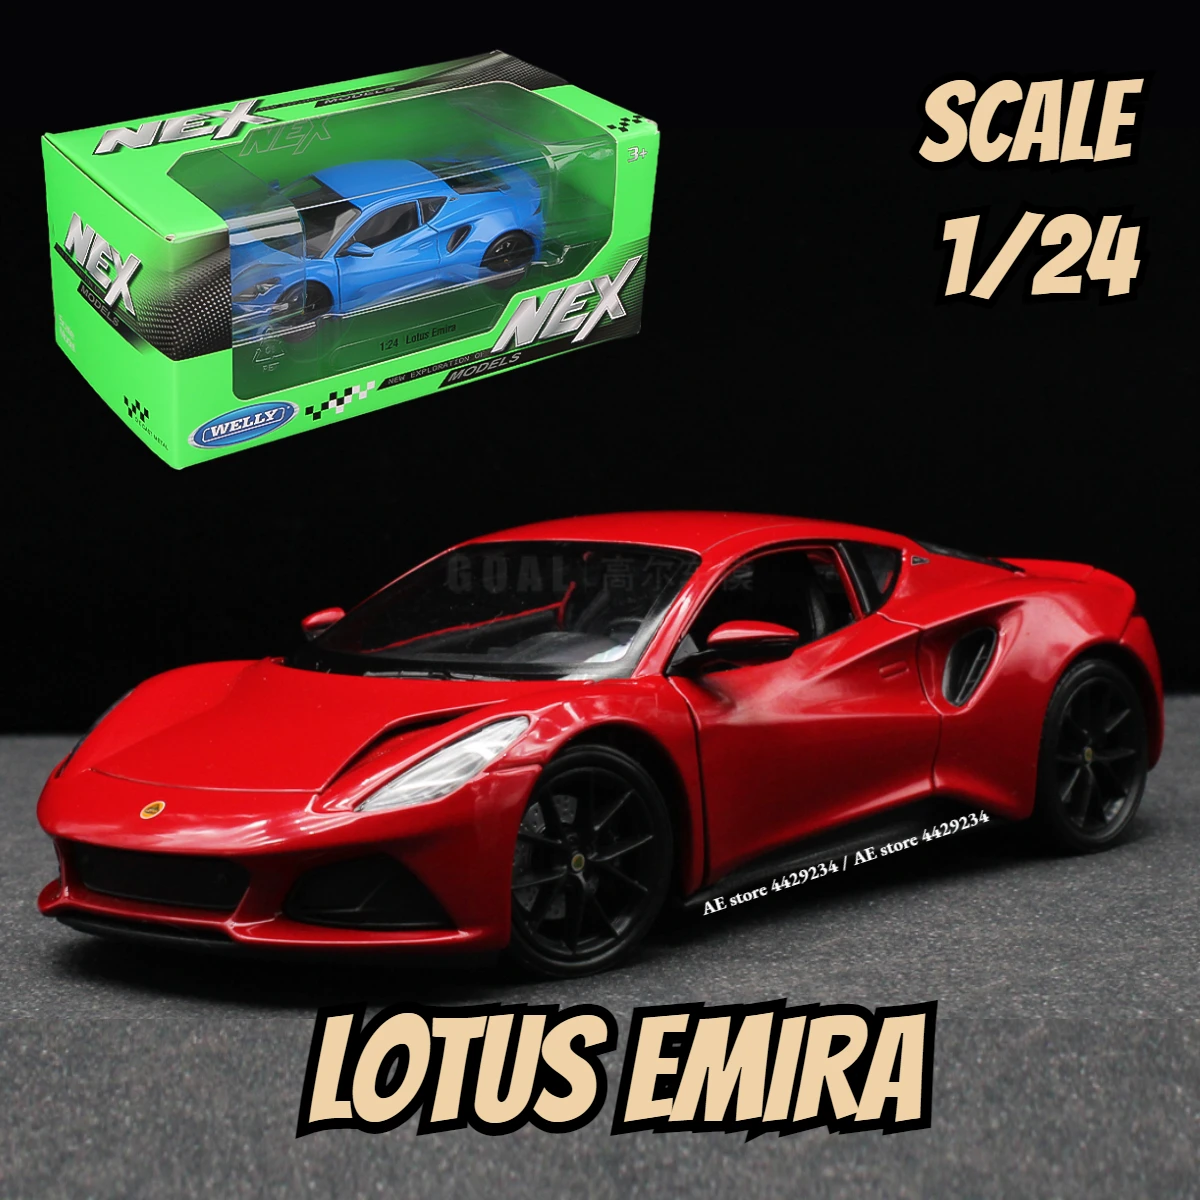 

WELLY 1:24 Lotus Emira Metal Diecast Car Model, Supercar Scale High Simulated Replica Miniarure Art Collection Gift Toy for Boy